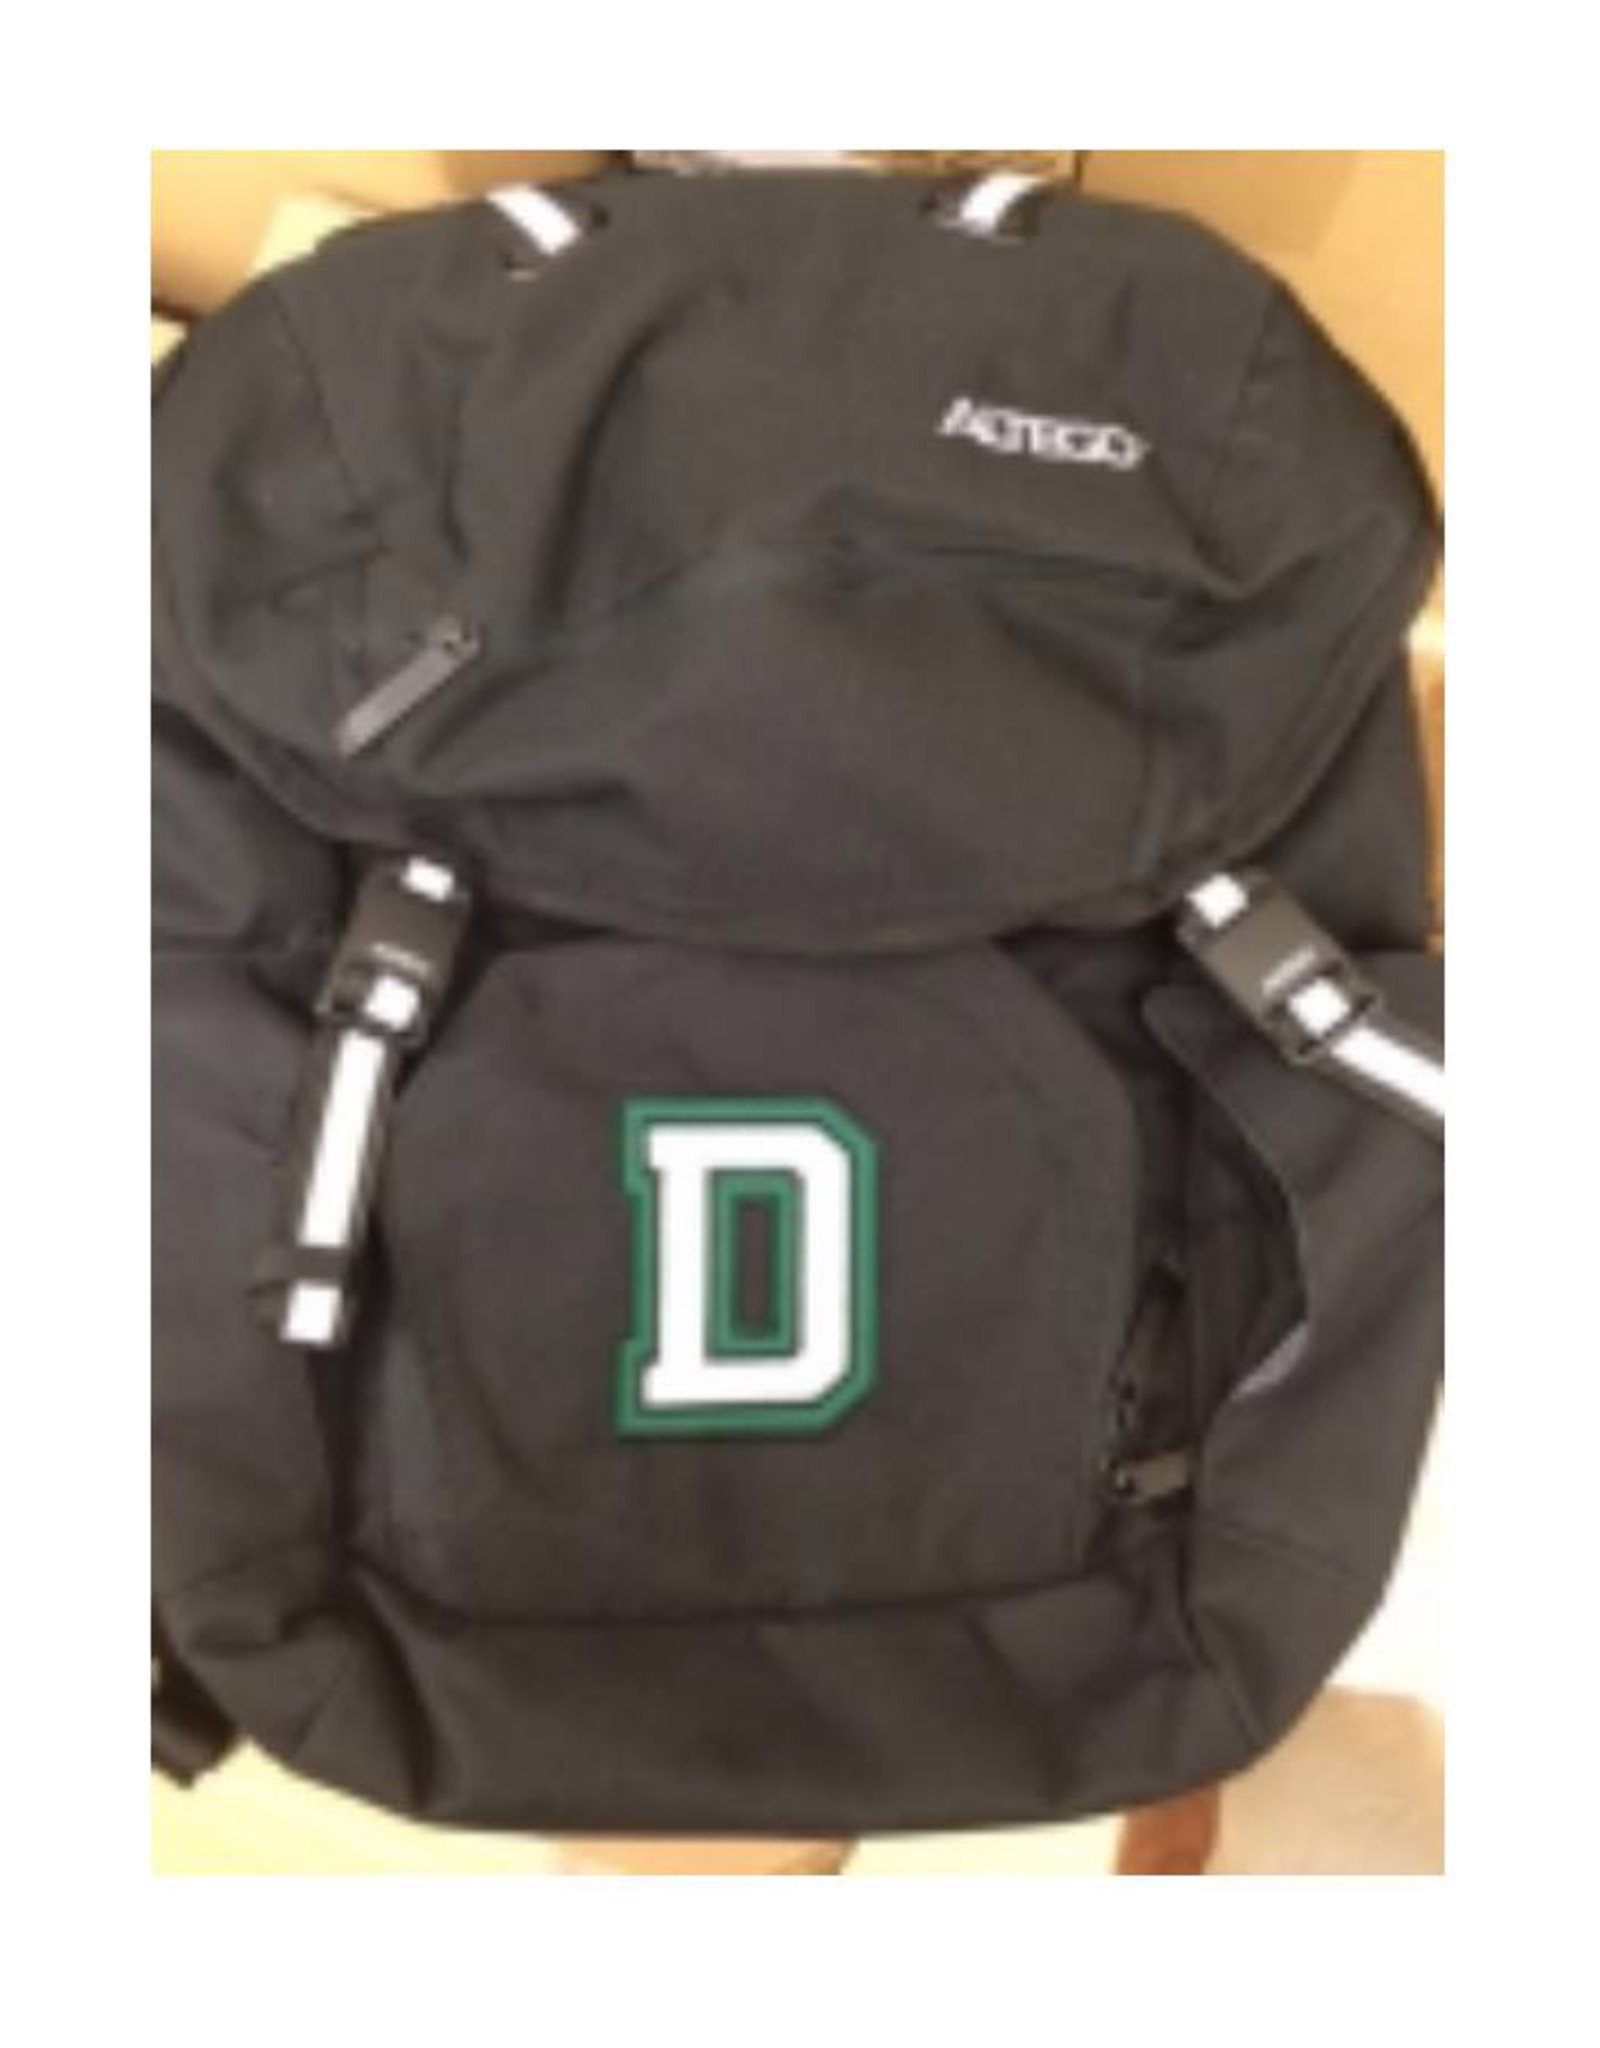 SAMSILL ALTEGO DARTMOUTH LOGO BACKPACK FOR LAPTOP (UP TO 13")